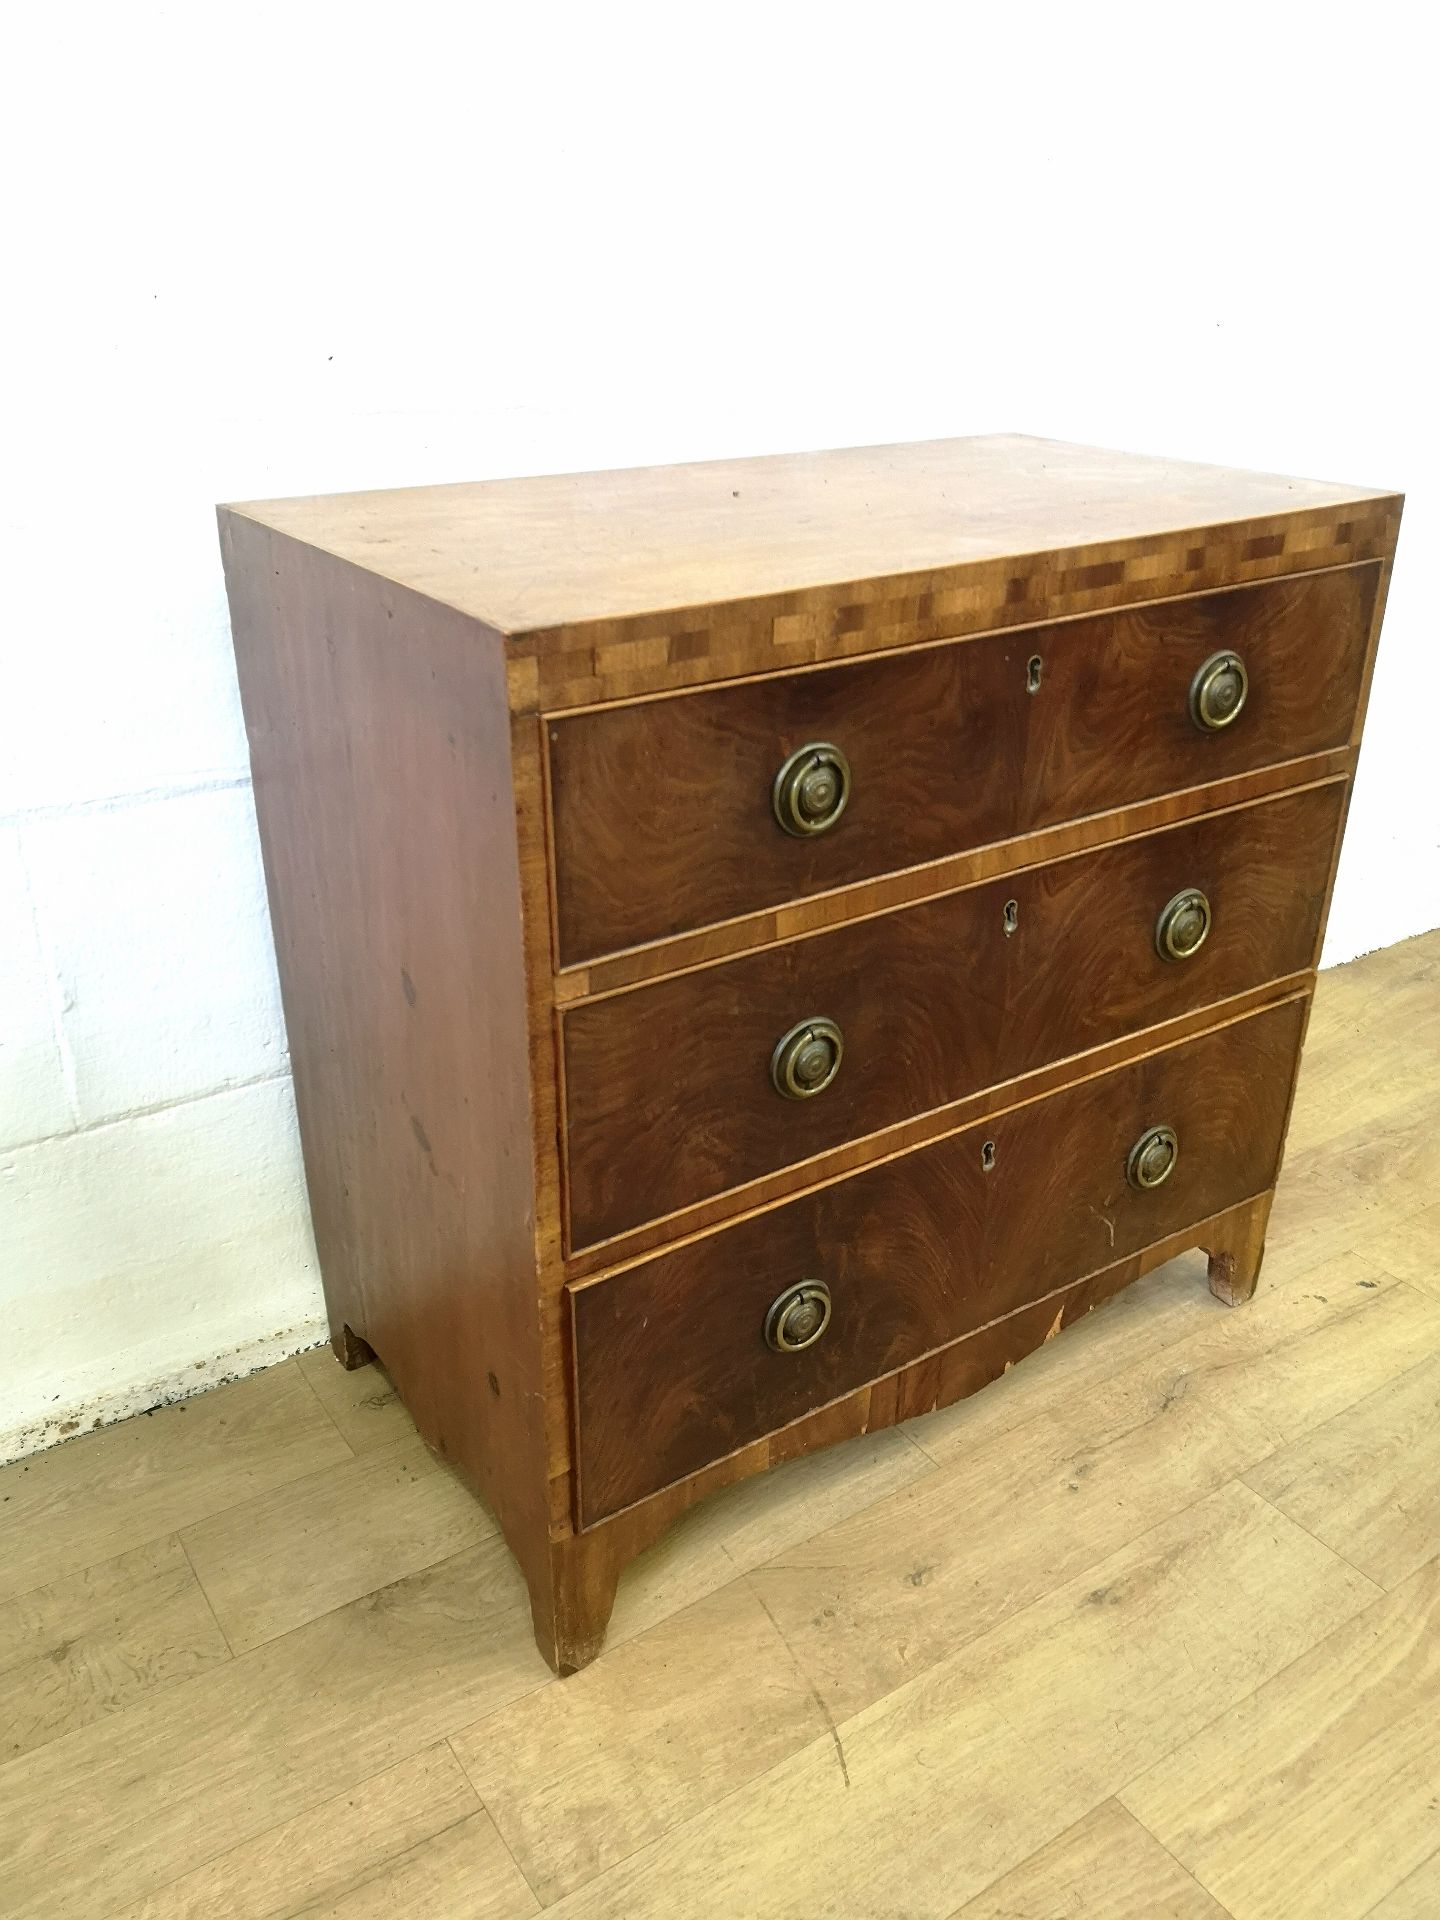 Victorian mahogany chest of drawers - Image 2 of 6